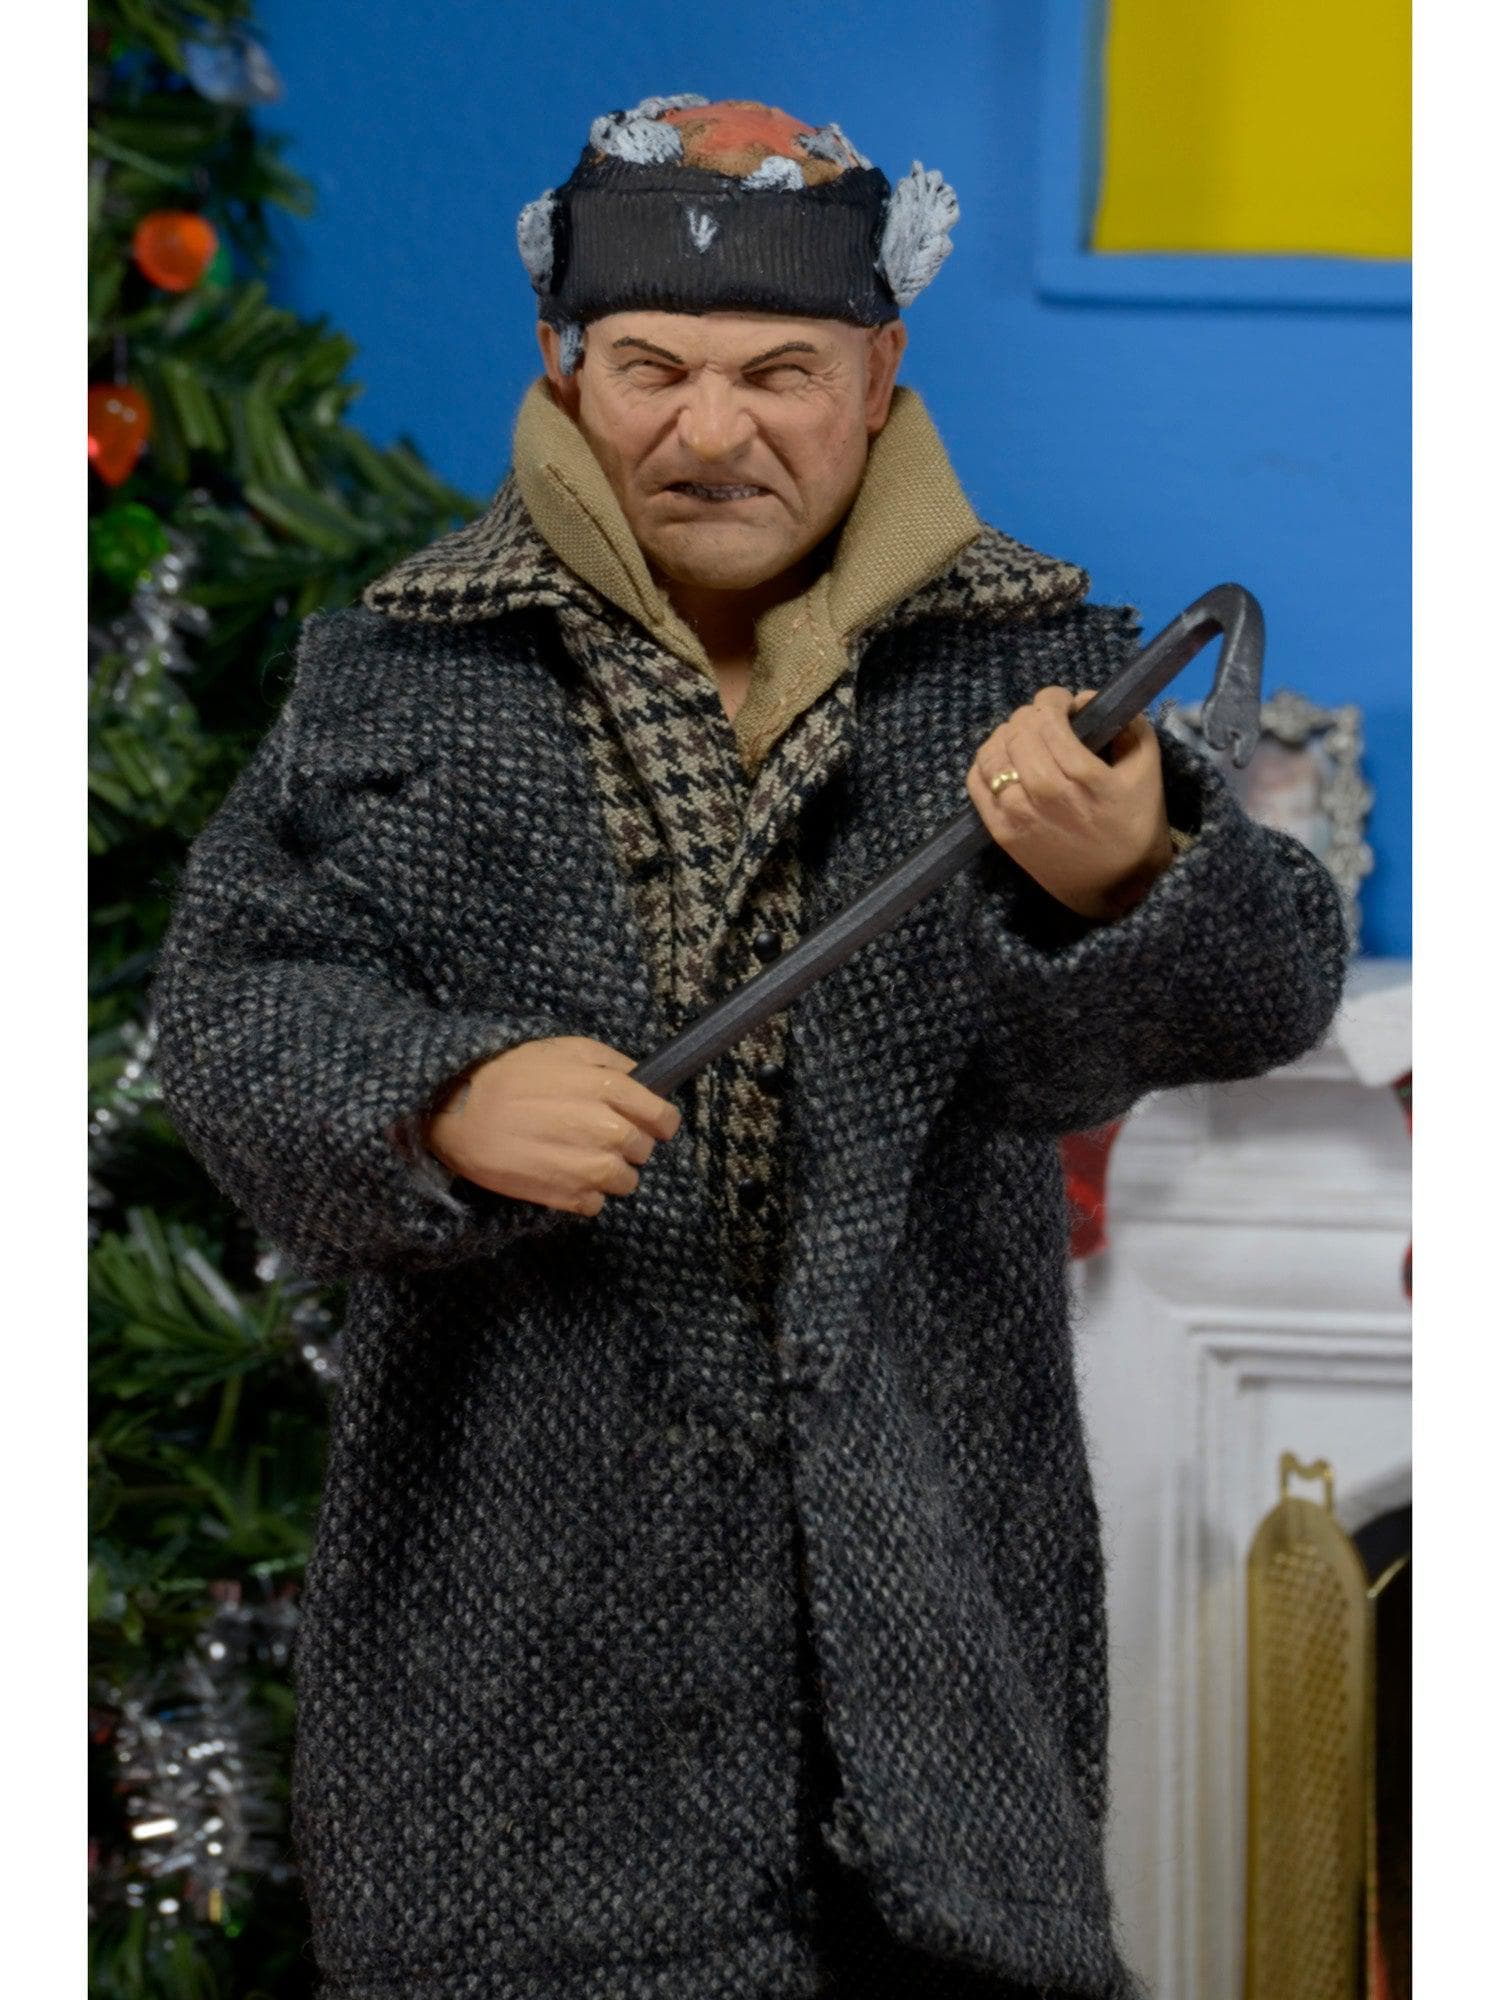 NECA - Home Alone - 8" Scale Clothed Action Figure - Harry - costumes.com